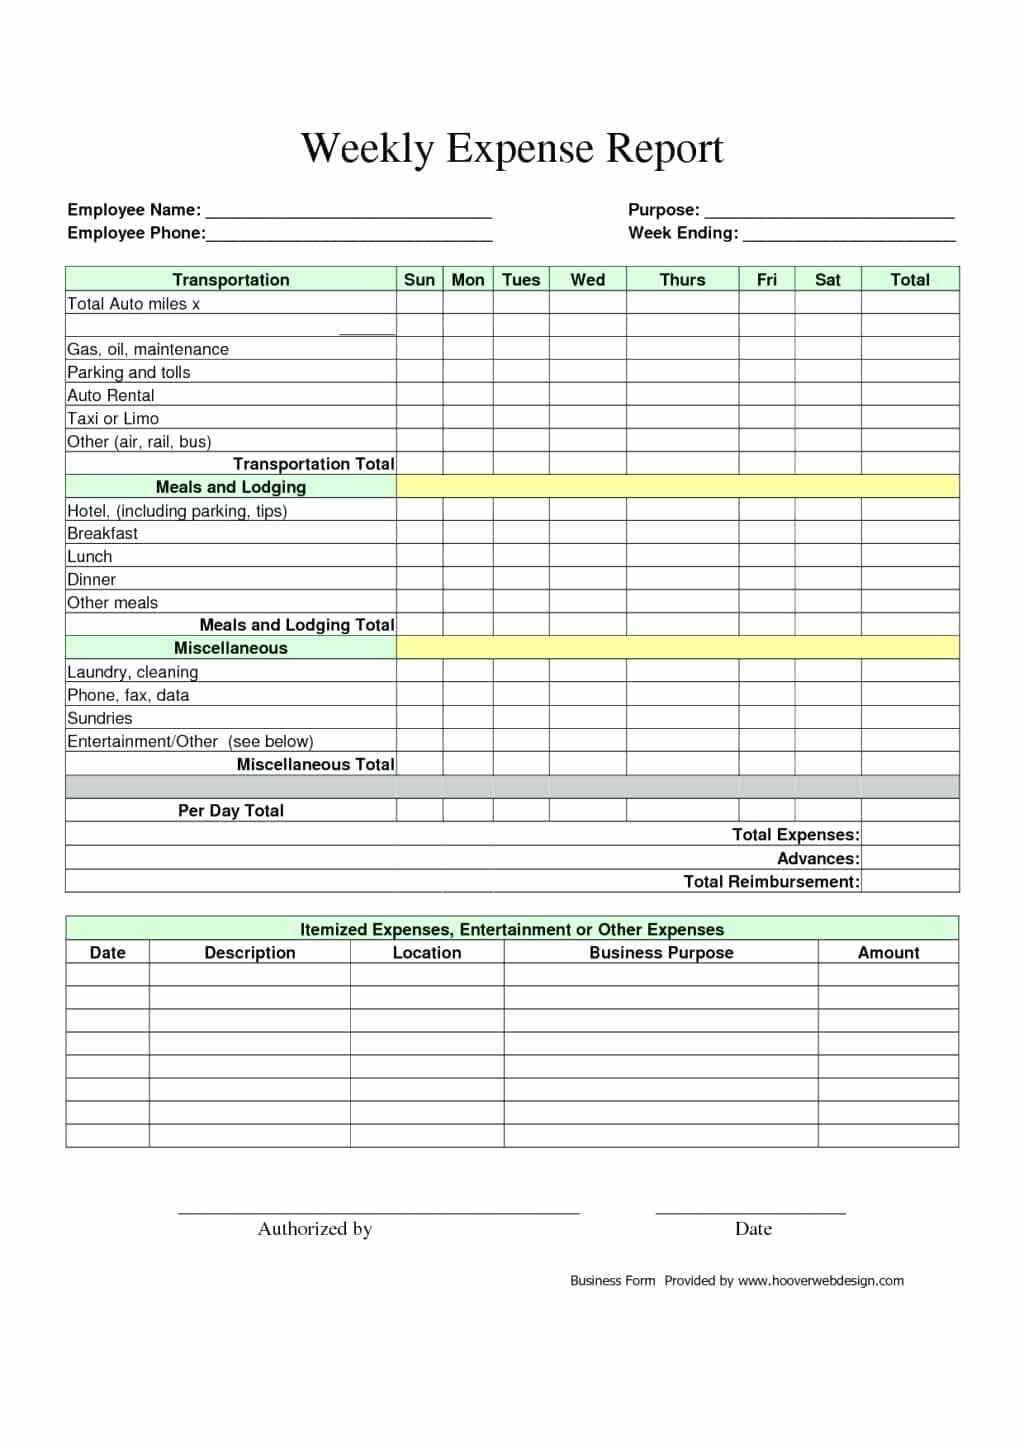 Template Event Expense Report Mileage Free And Form Excel For Gas Mileage Expense Report Template